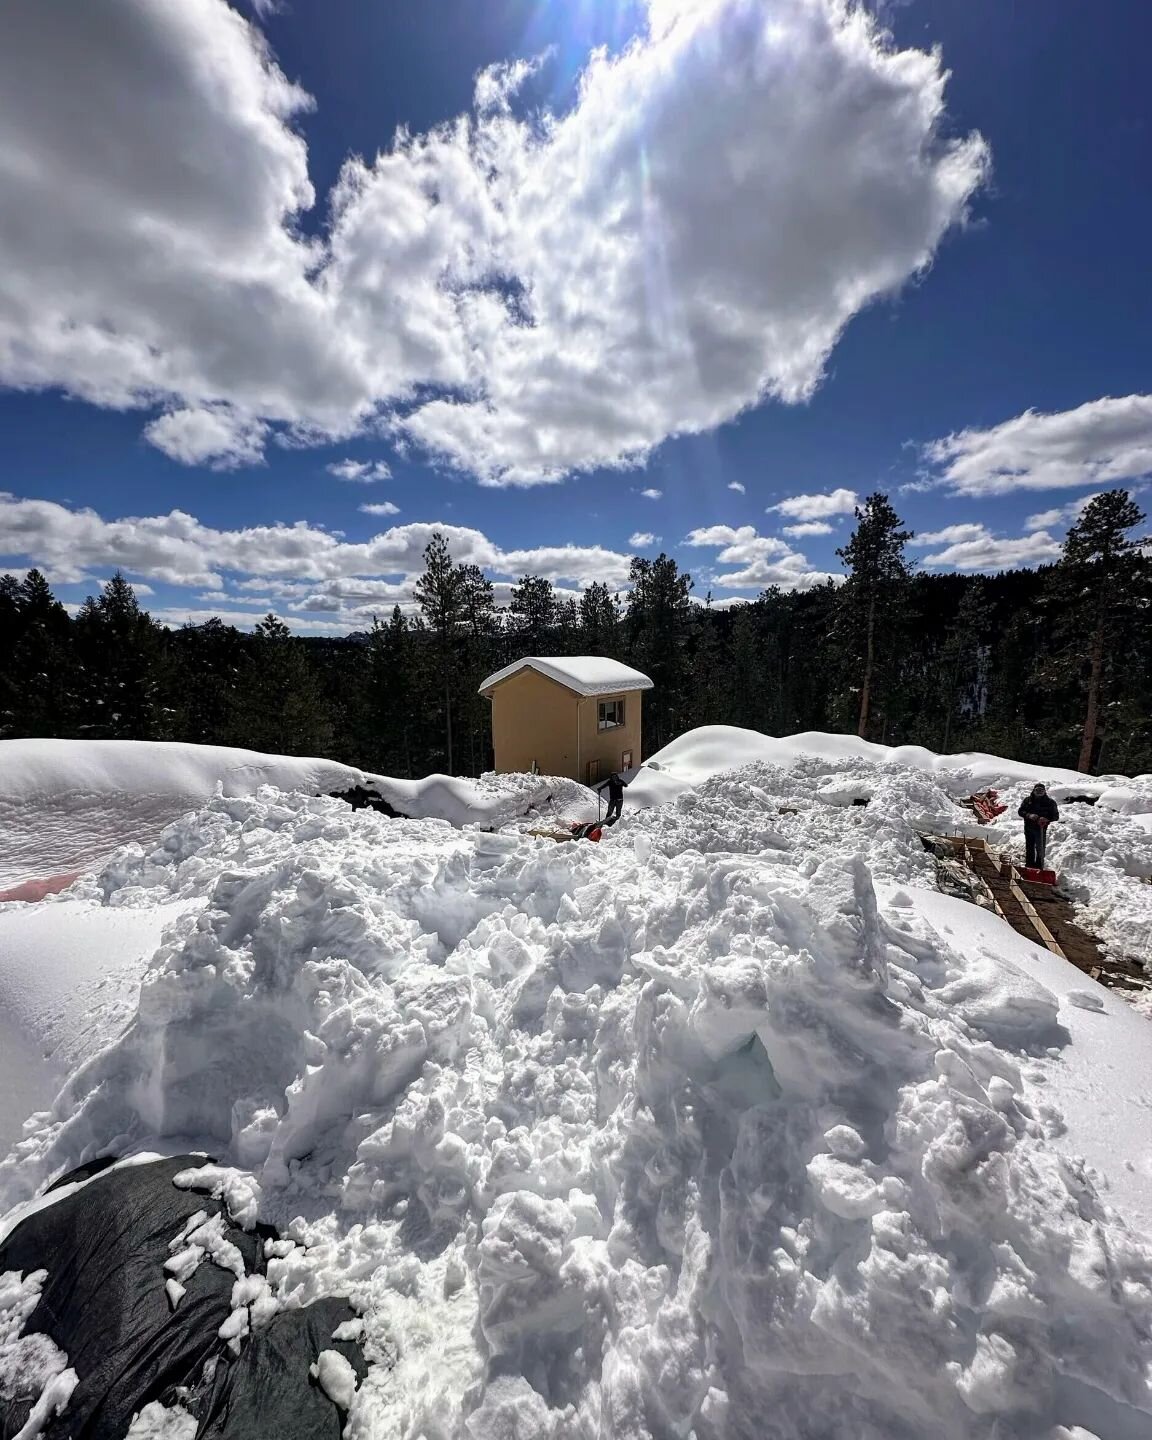 Our partners digging out footings at Blue Sky Valley 💪 

#snowpocalypse #evergreencolorado #generalcontractor #footings #buildinginallweather #retreat #constructionpartners #constructionmanagement ##BESTBUILT #bestcustomhomes